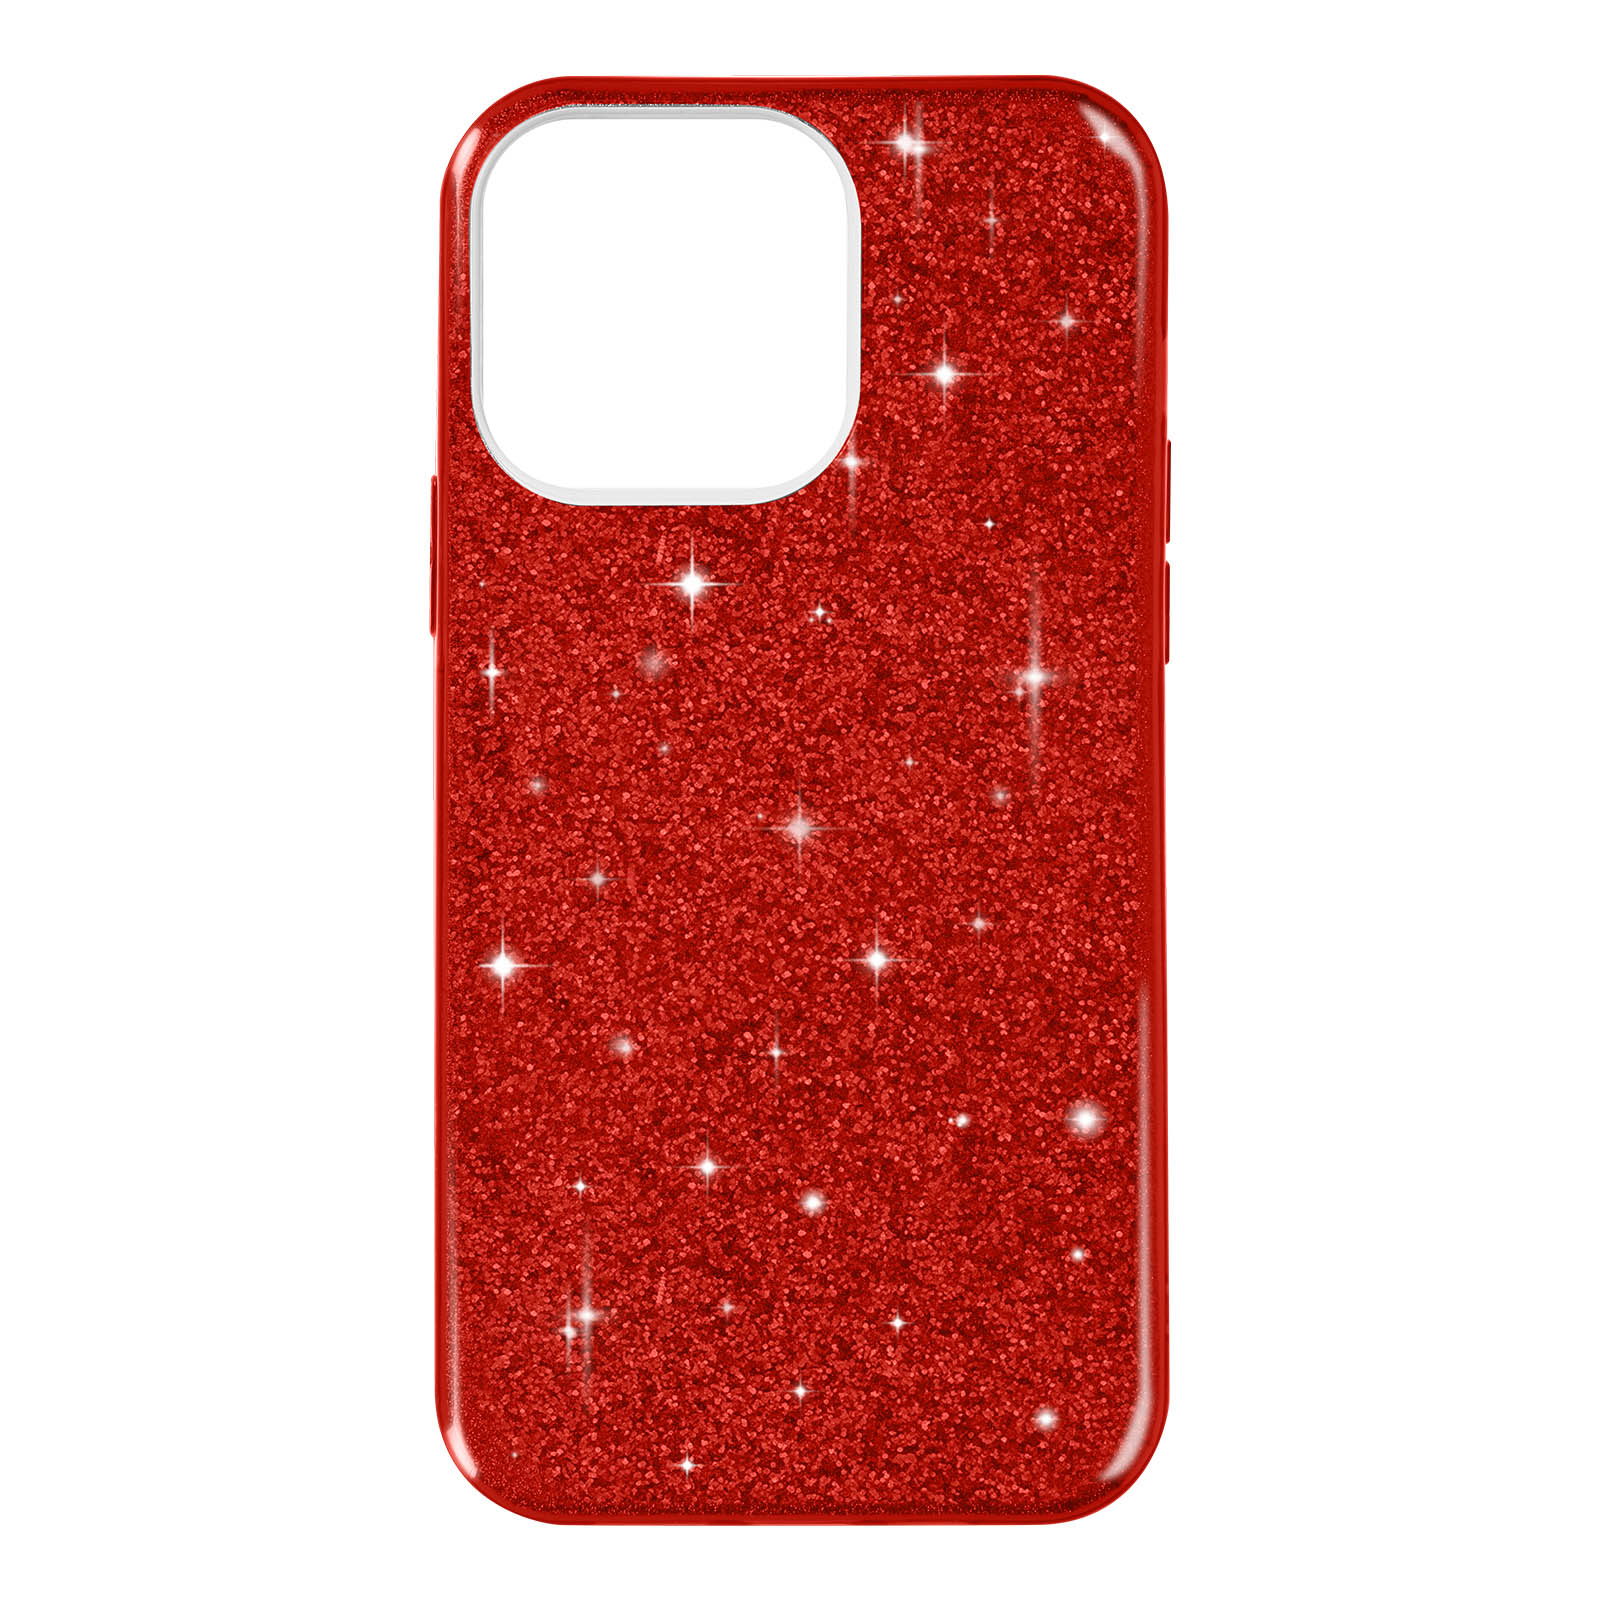 AVIZAR Papay Series, 14 Max, Pro Rot iPhone Backcover, Apple